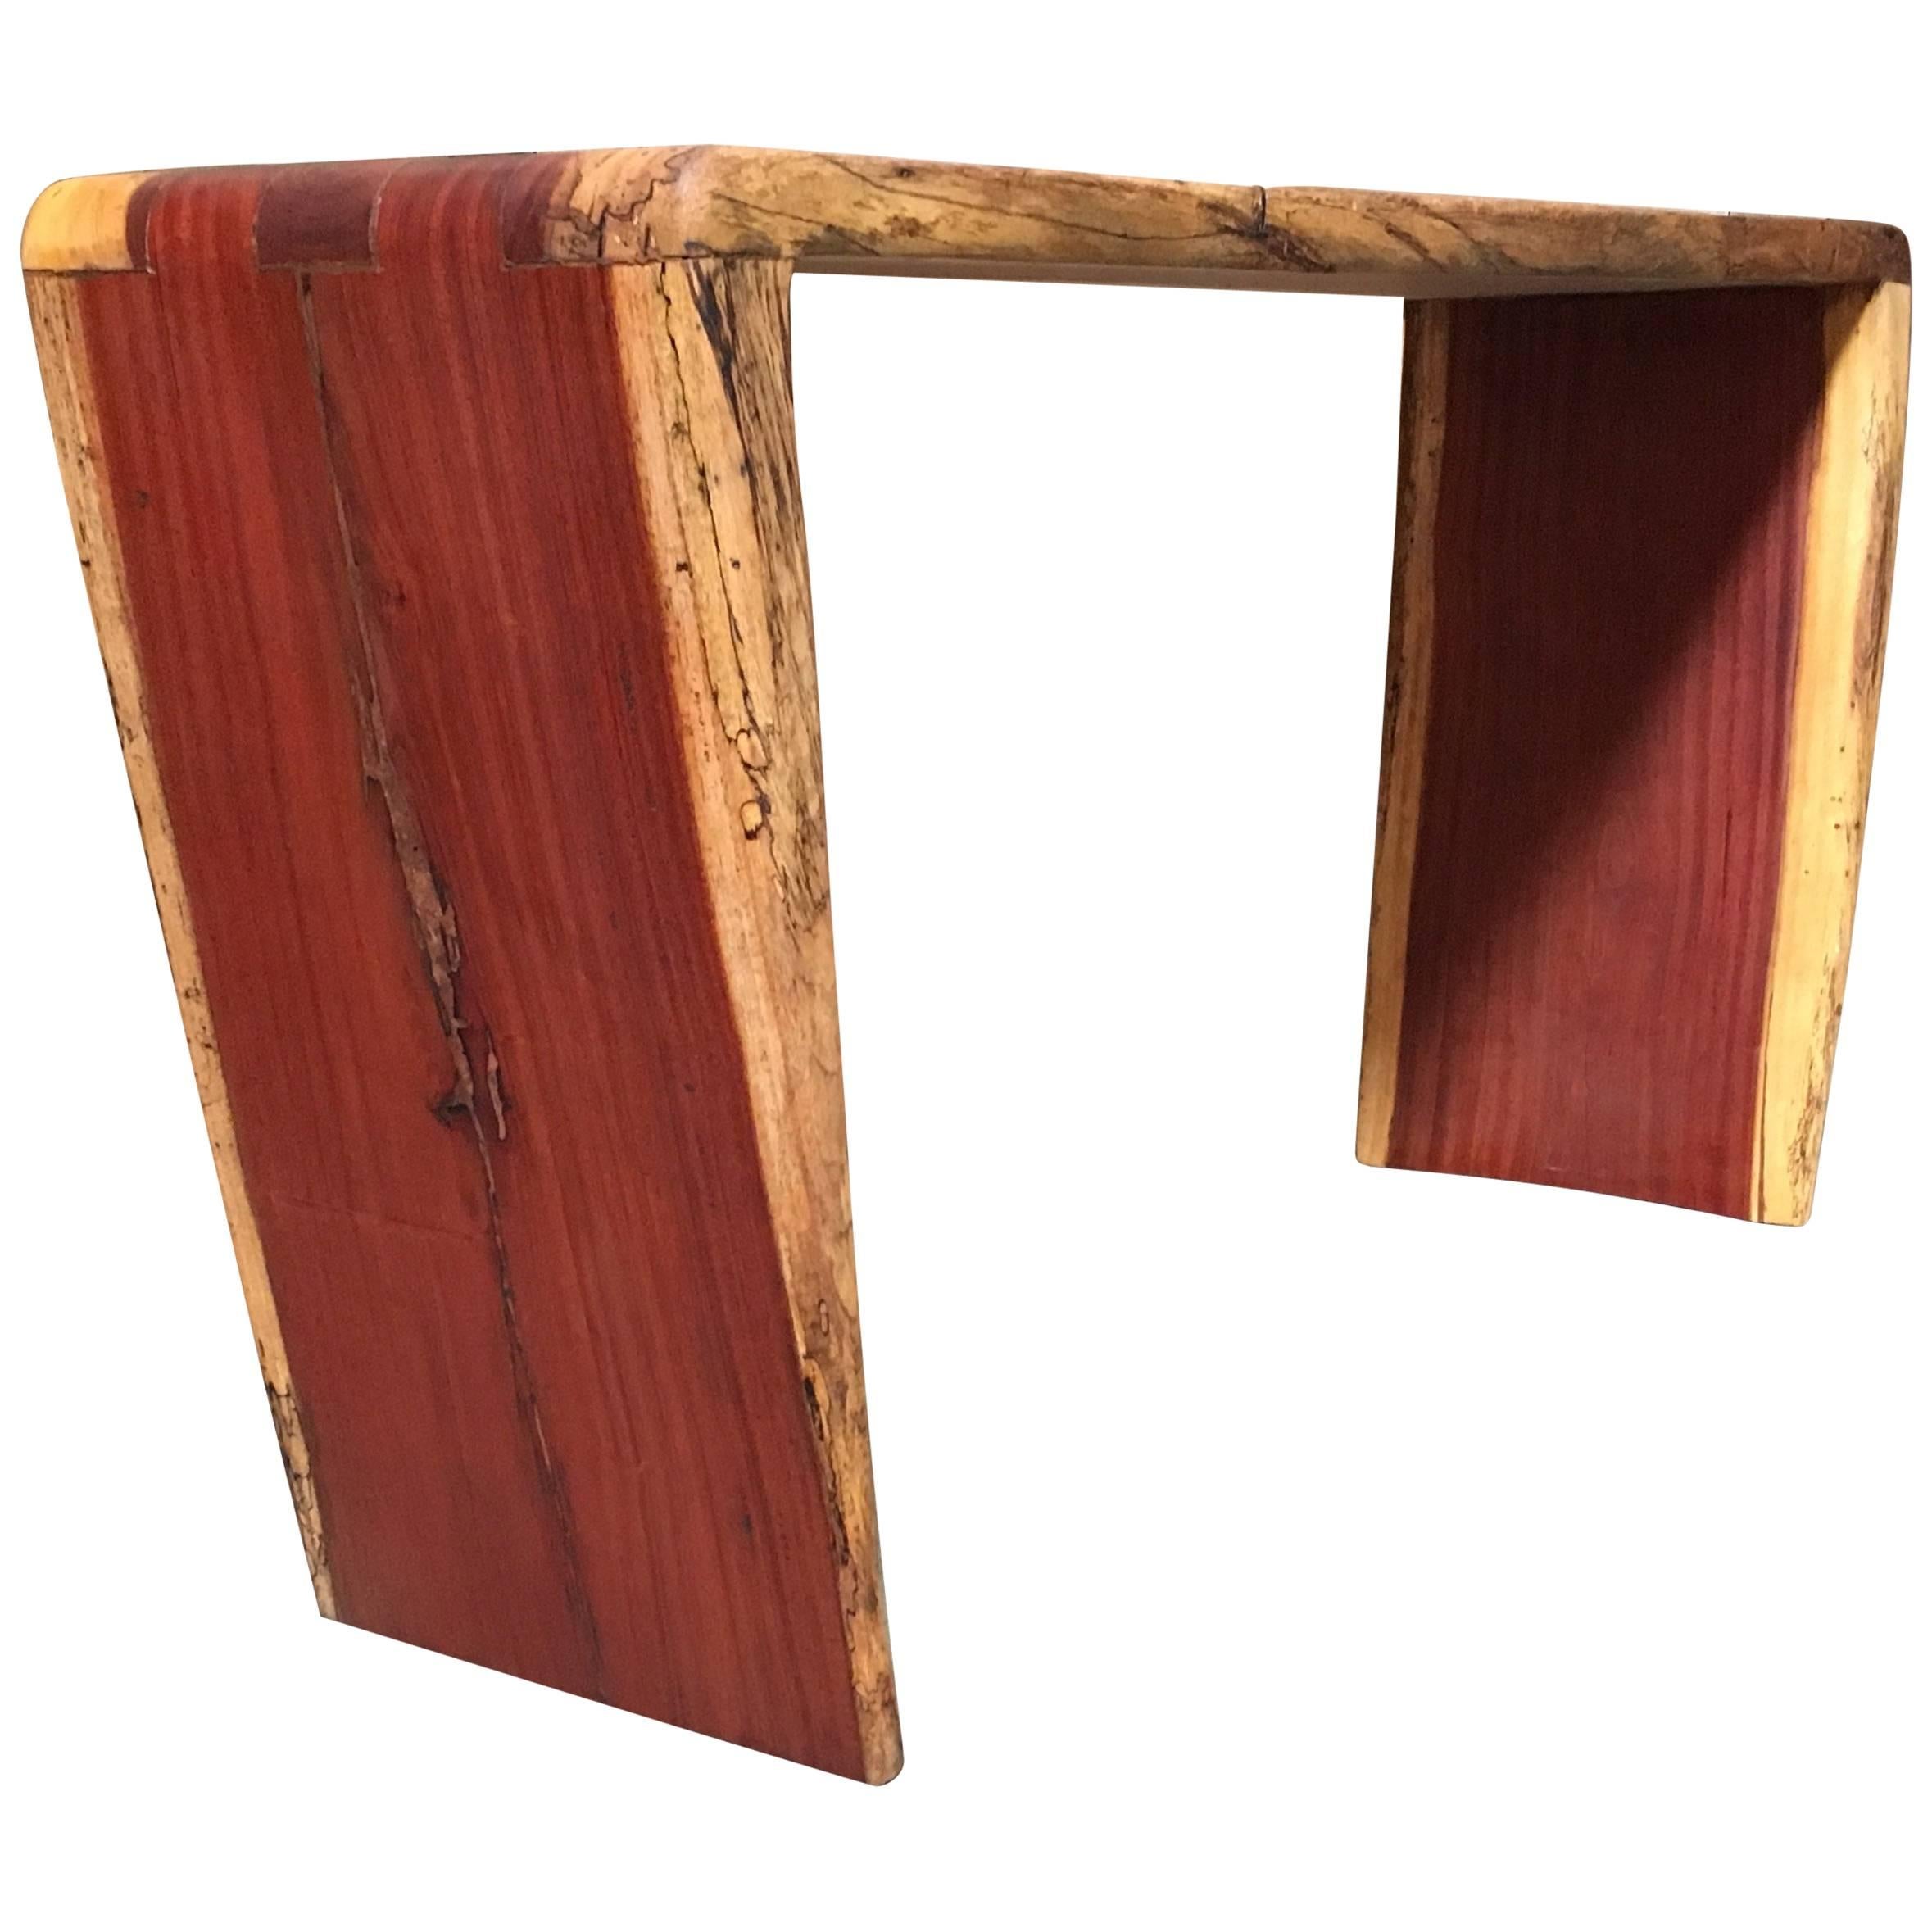 Modernist Rustic Console Table by Tunico T.